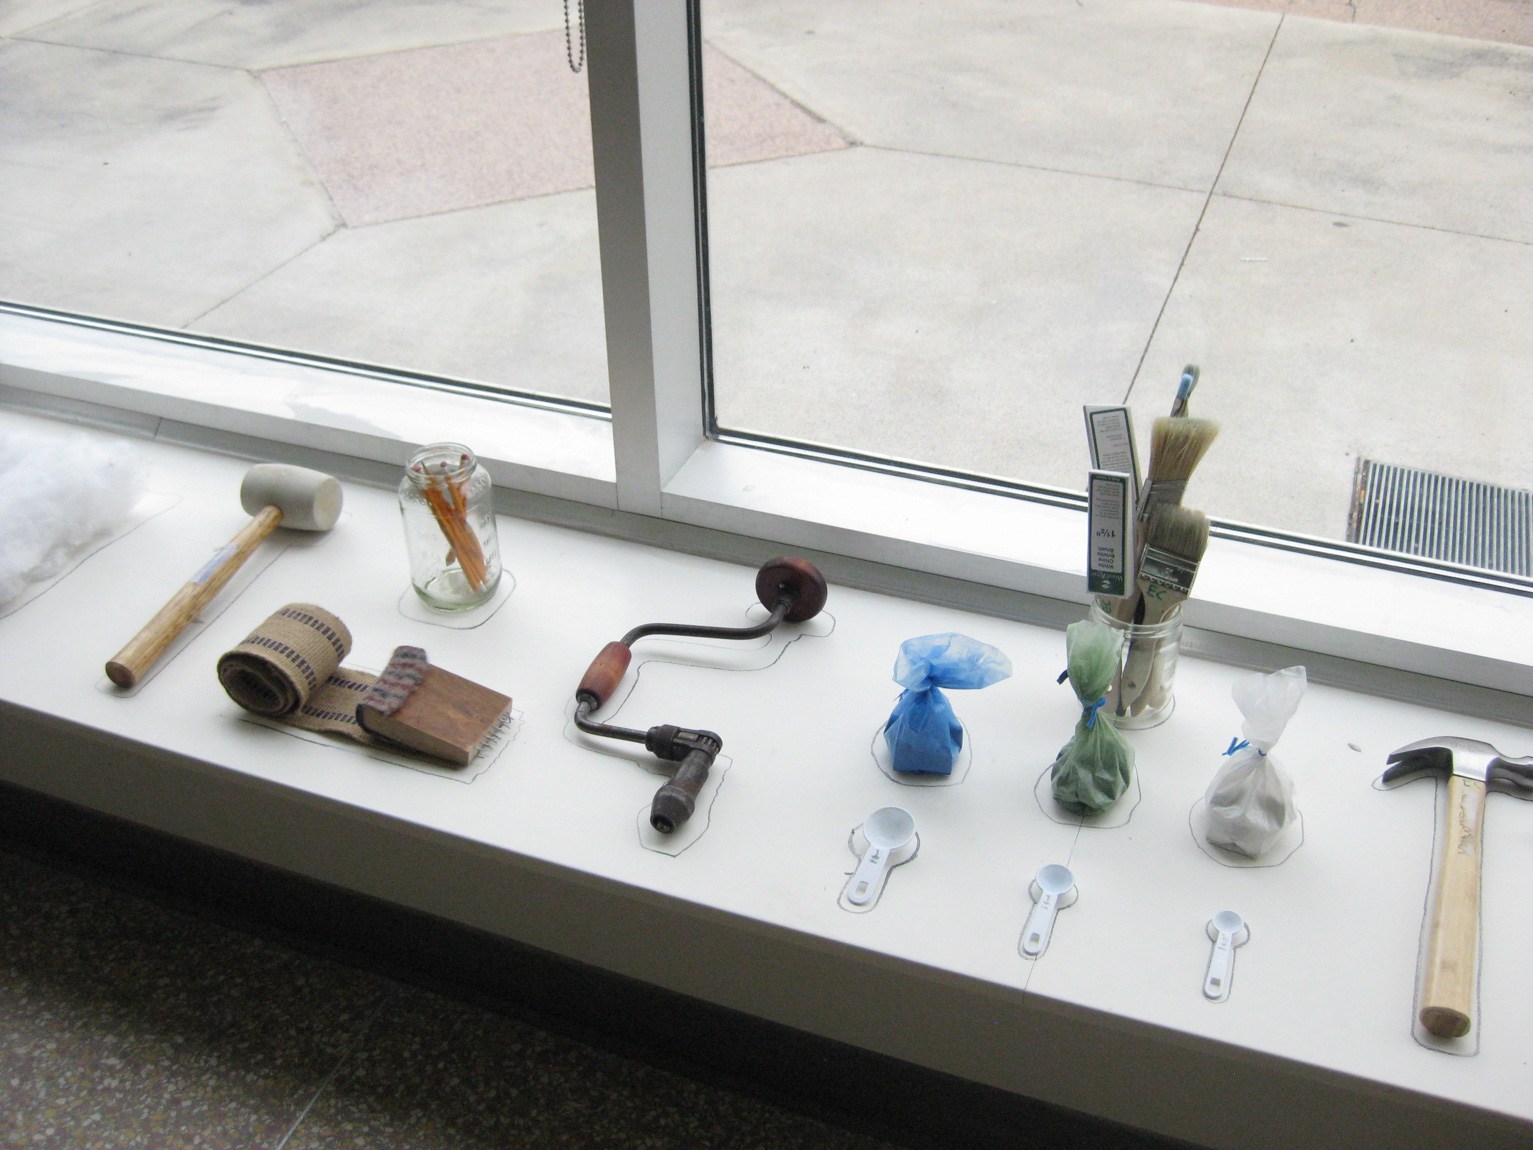 Various tools and utensils arranged on a platform next to a window, their shapes outlined with marker.